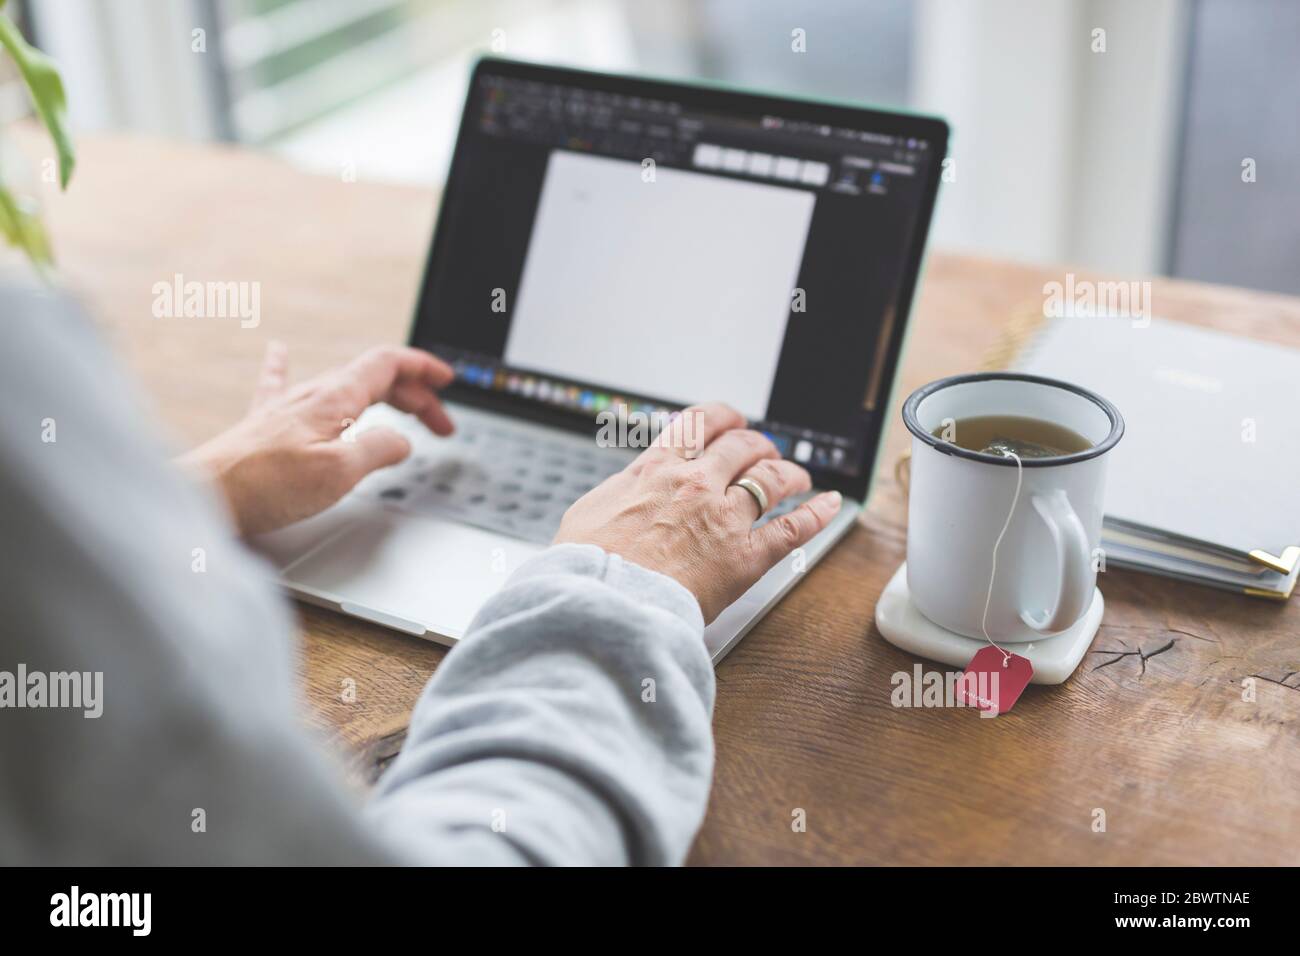 Woman working on laptop, with cup of tea on the side Stock Photo